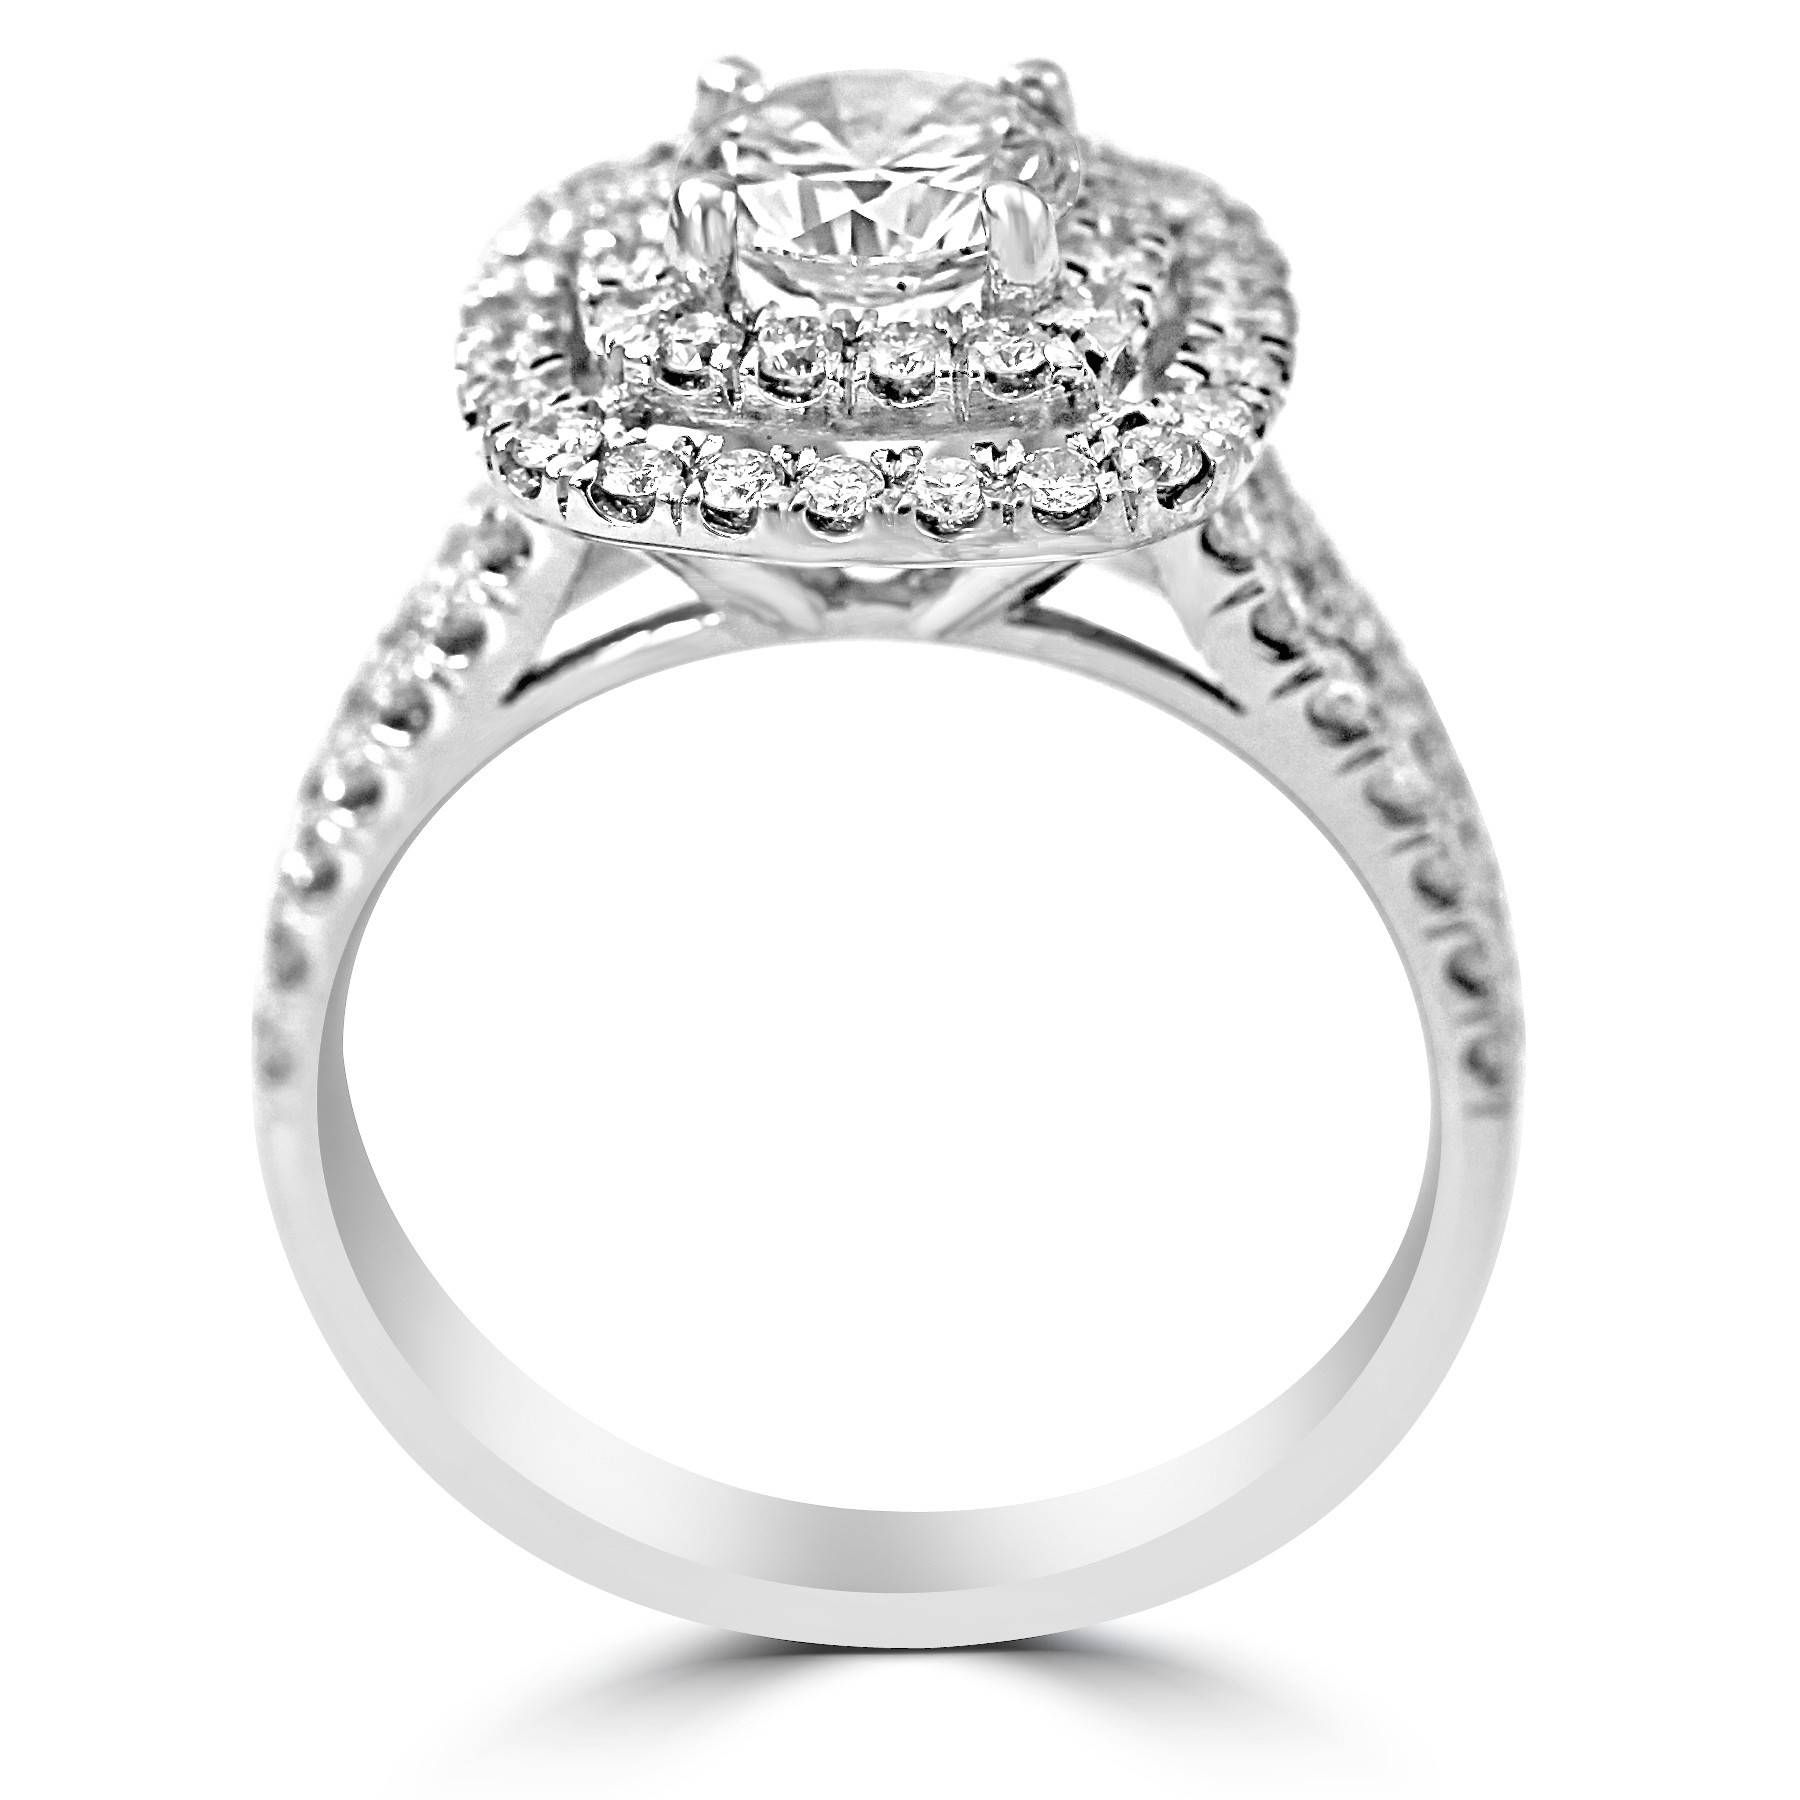 Jean Pierre Jewelers Within Round Cut Halo Engagement Rings (View 4 of 15)